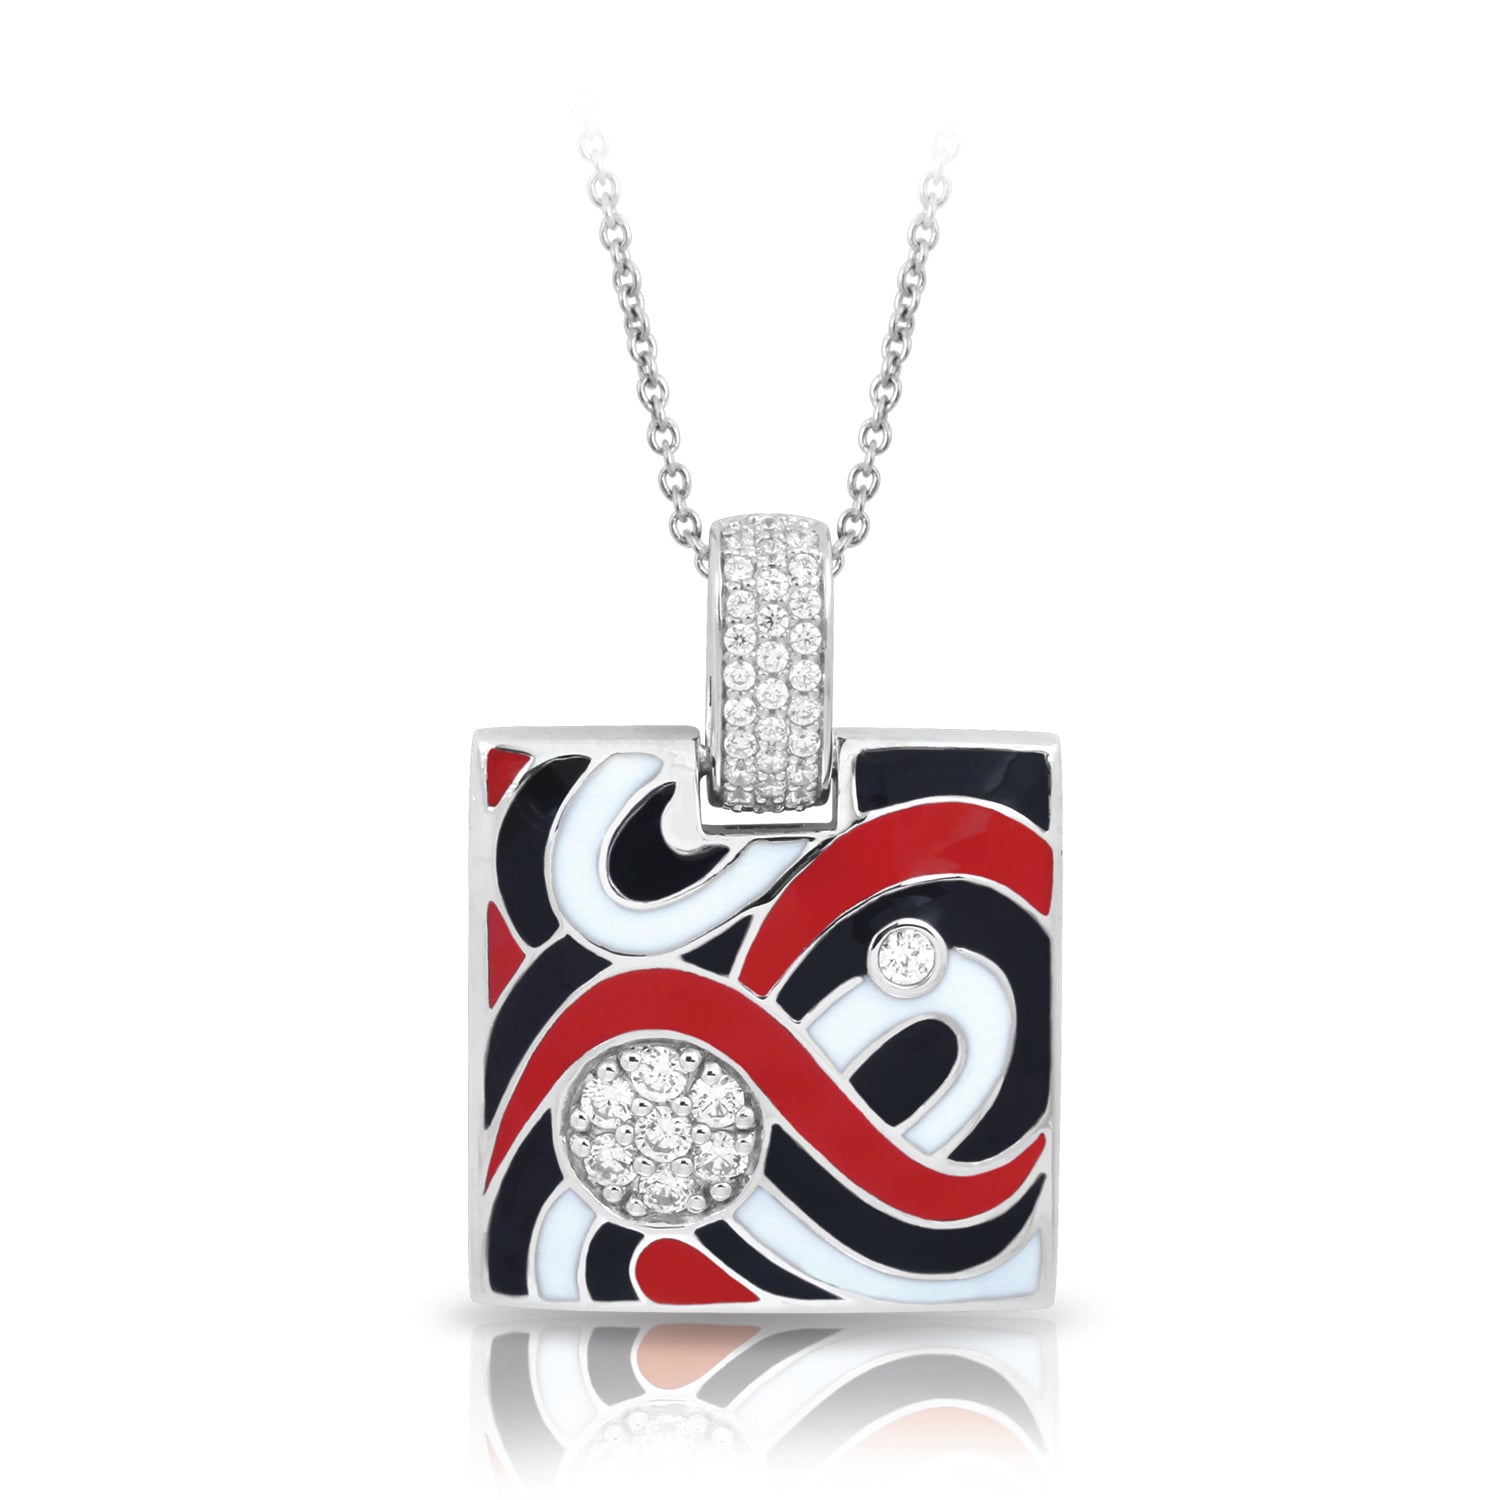 Red, black and white enamel with white zirconia swirl design pendant in sterling silver by Belle Etoile